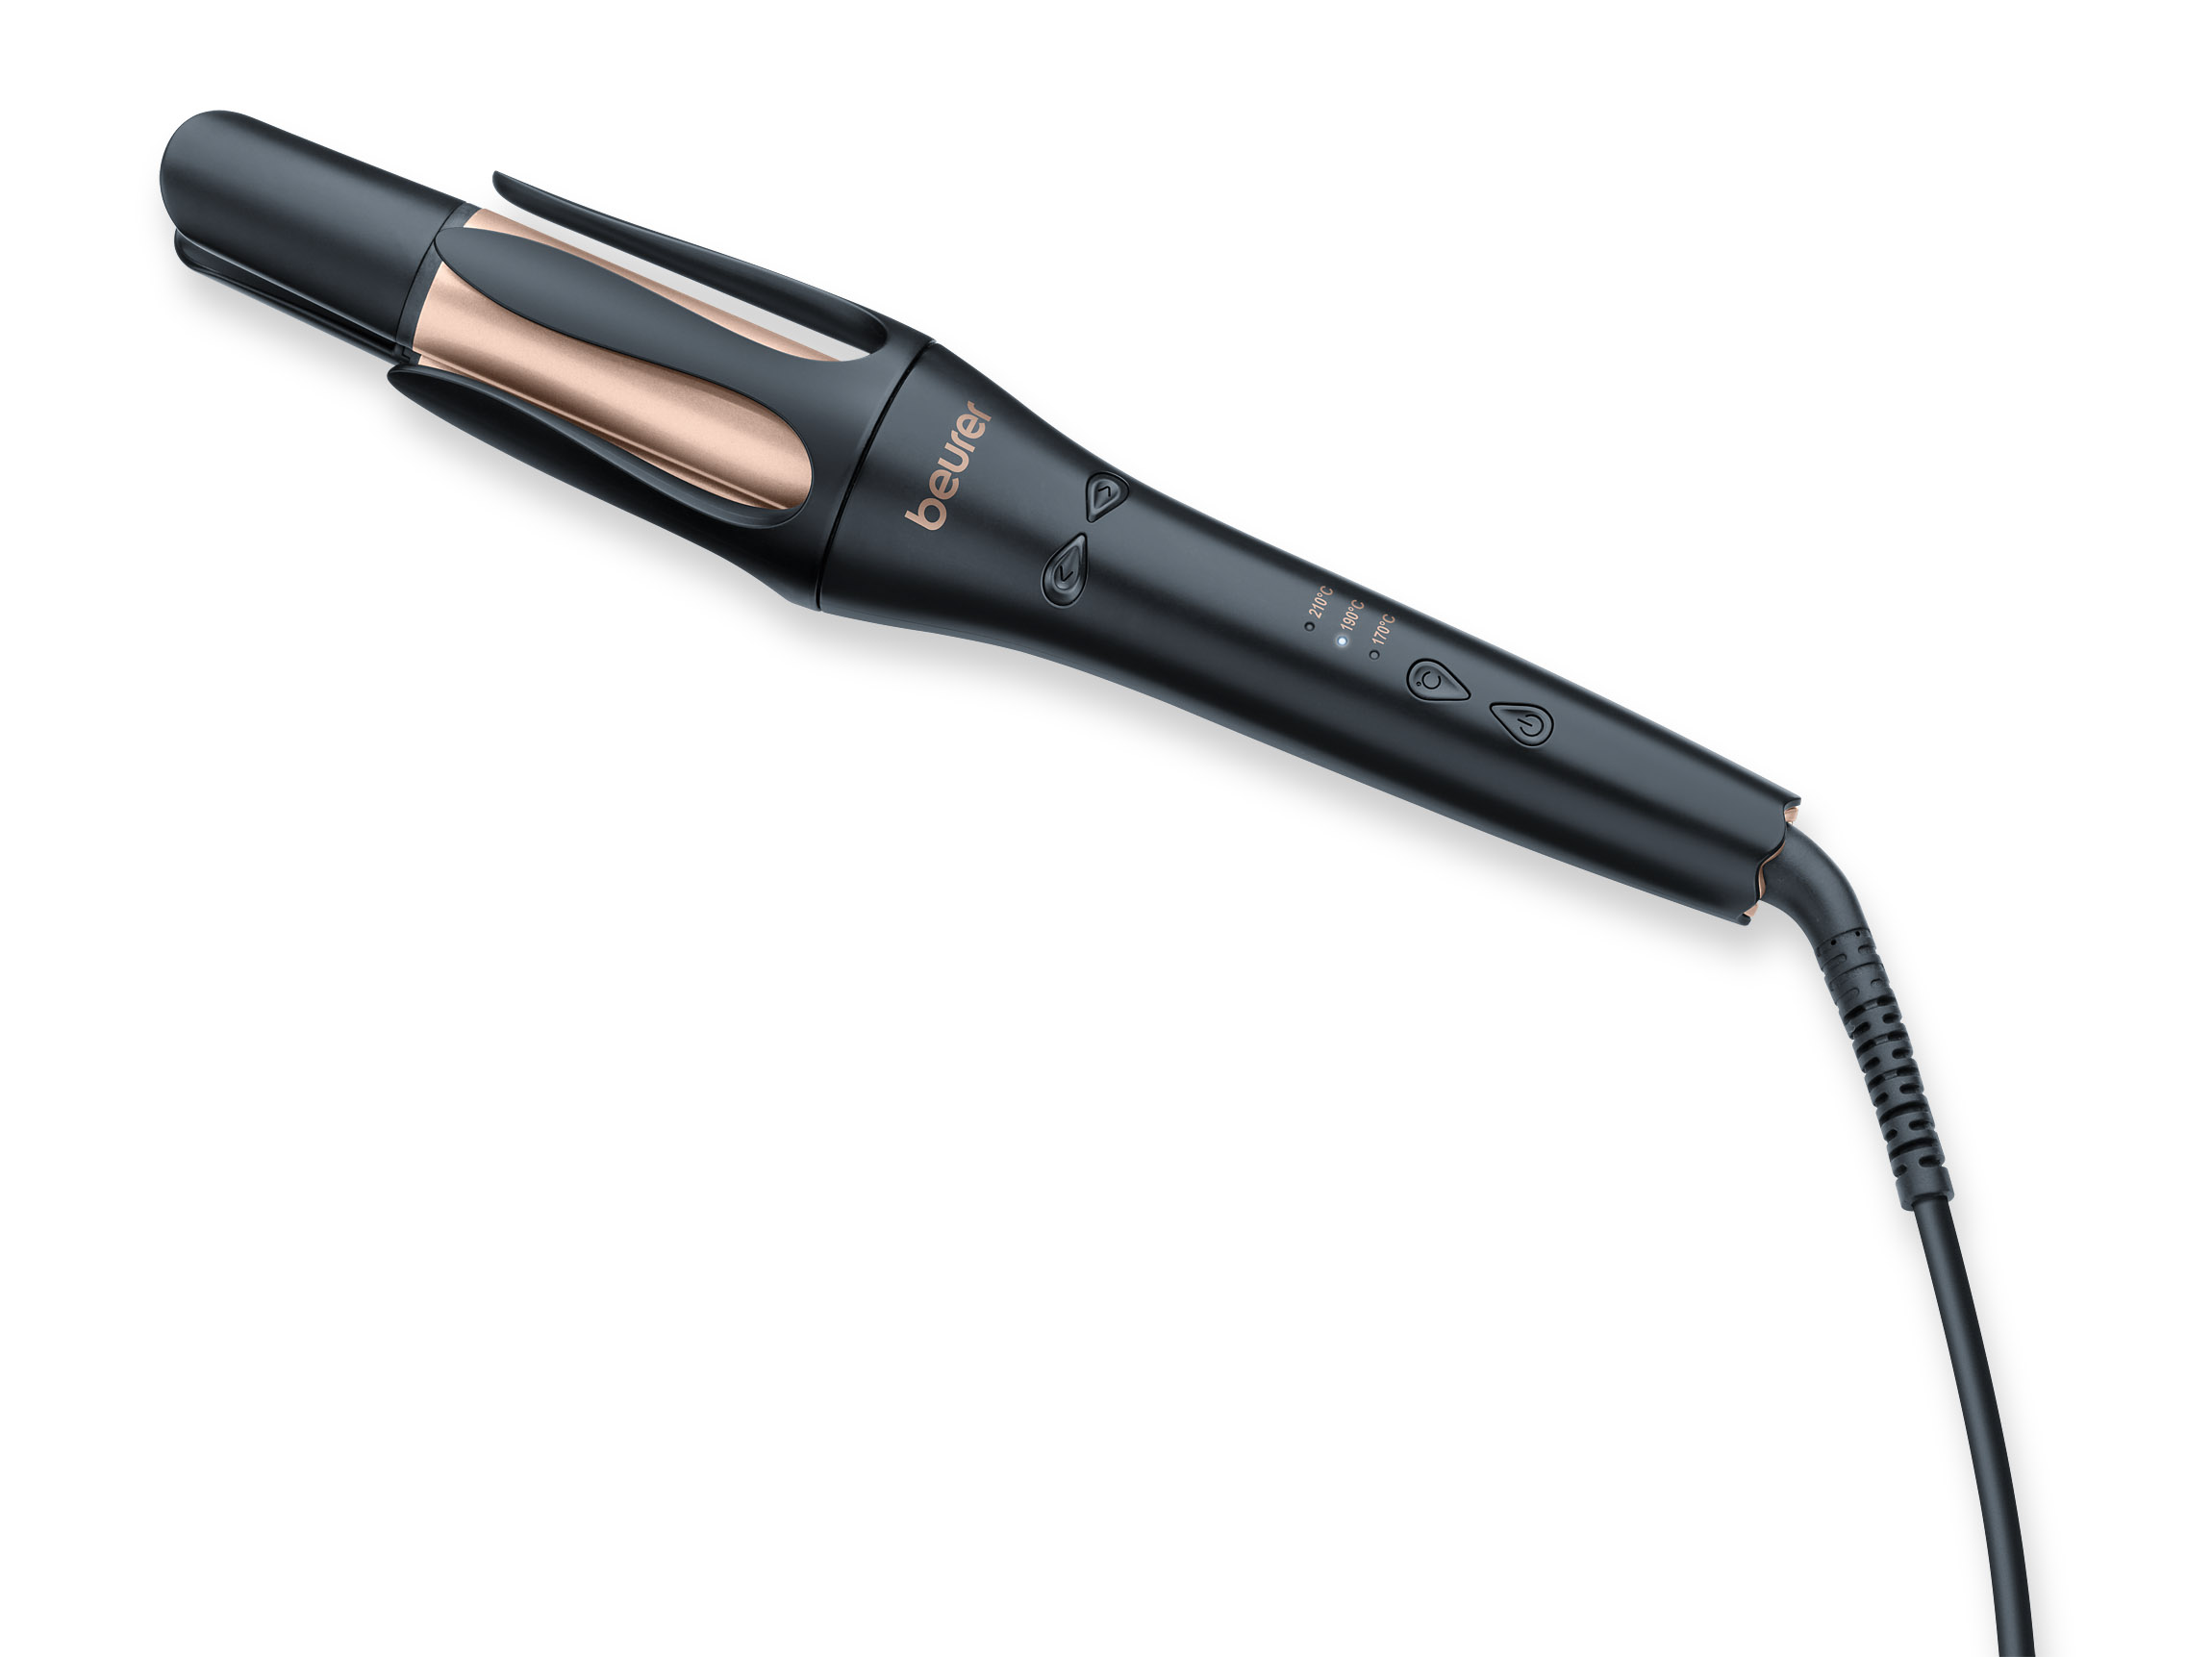 Beurer launches new automatic curling iron